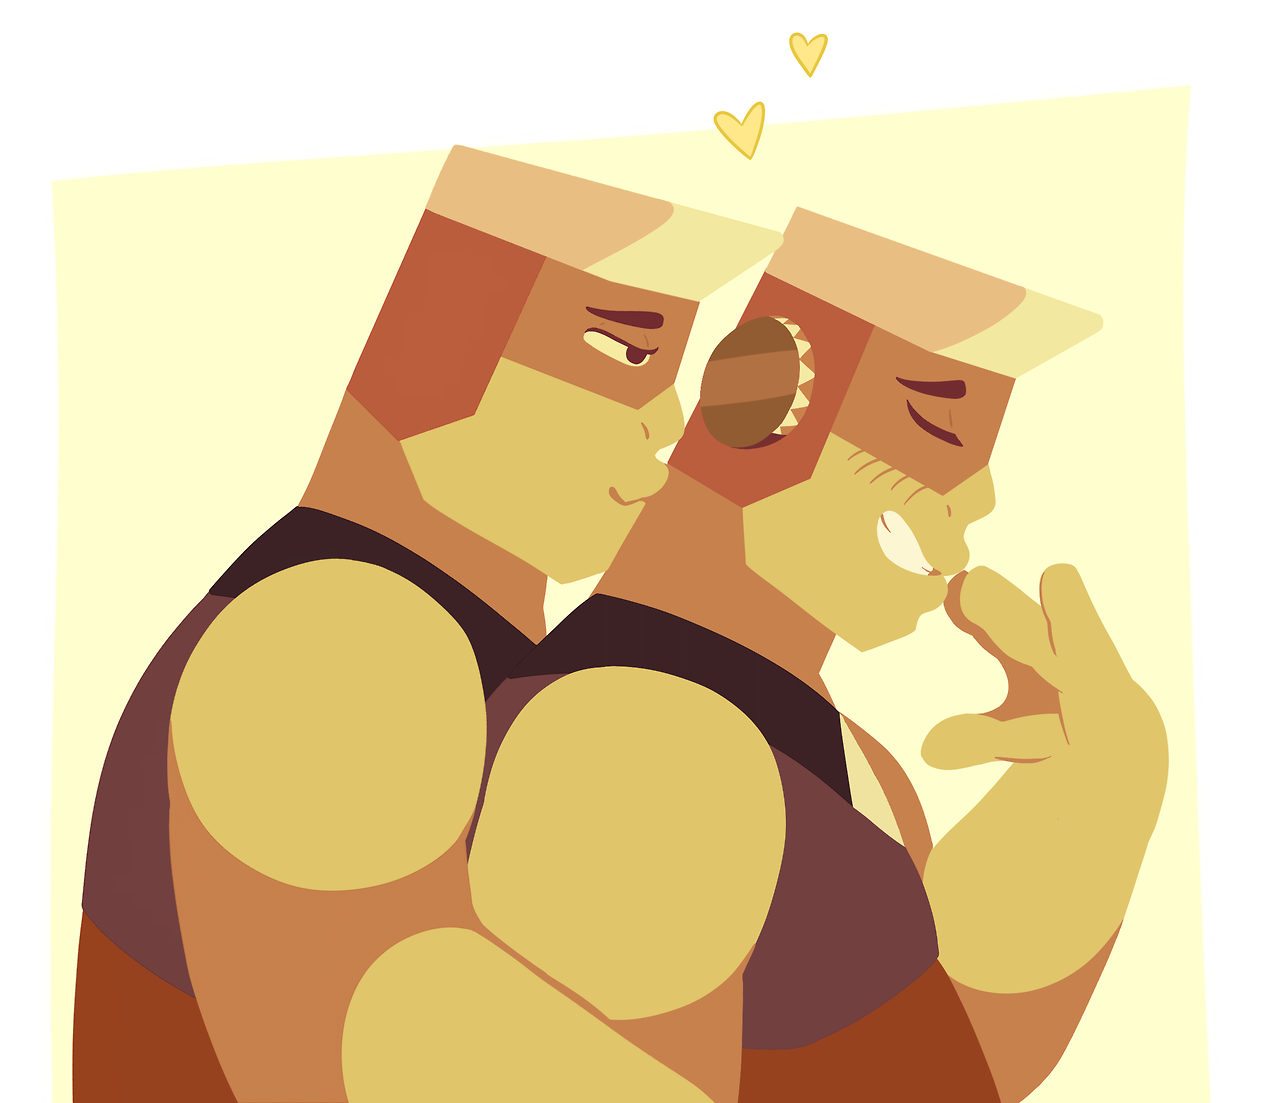 Remember to give your Fusion Pal™* the recommended dose of Smooches daily for Optimal Fighting Capabilities (*They’re lesbians, Harold)